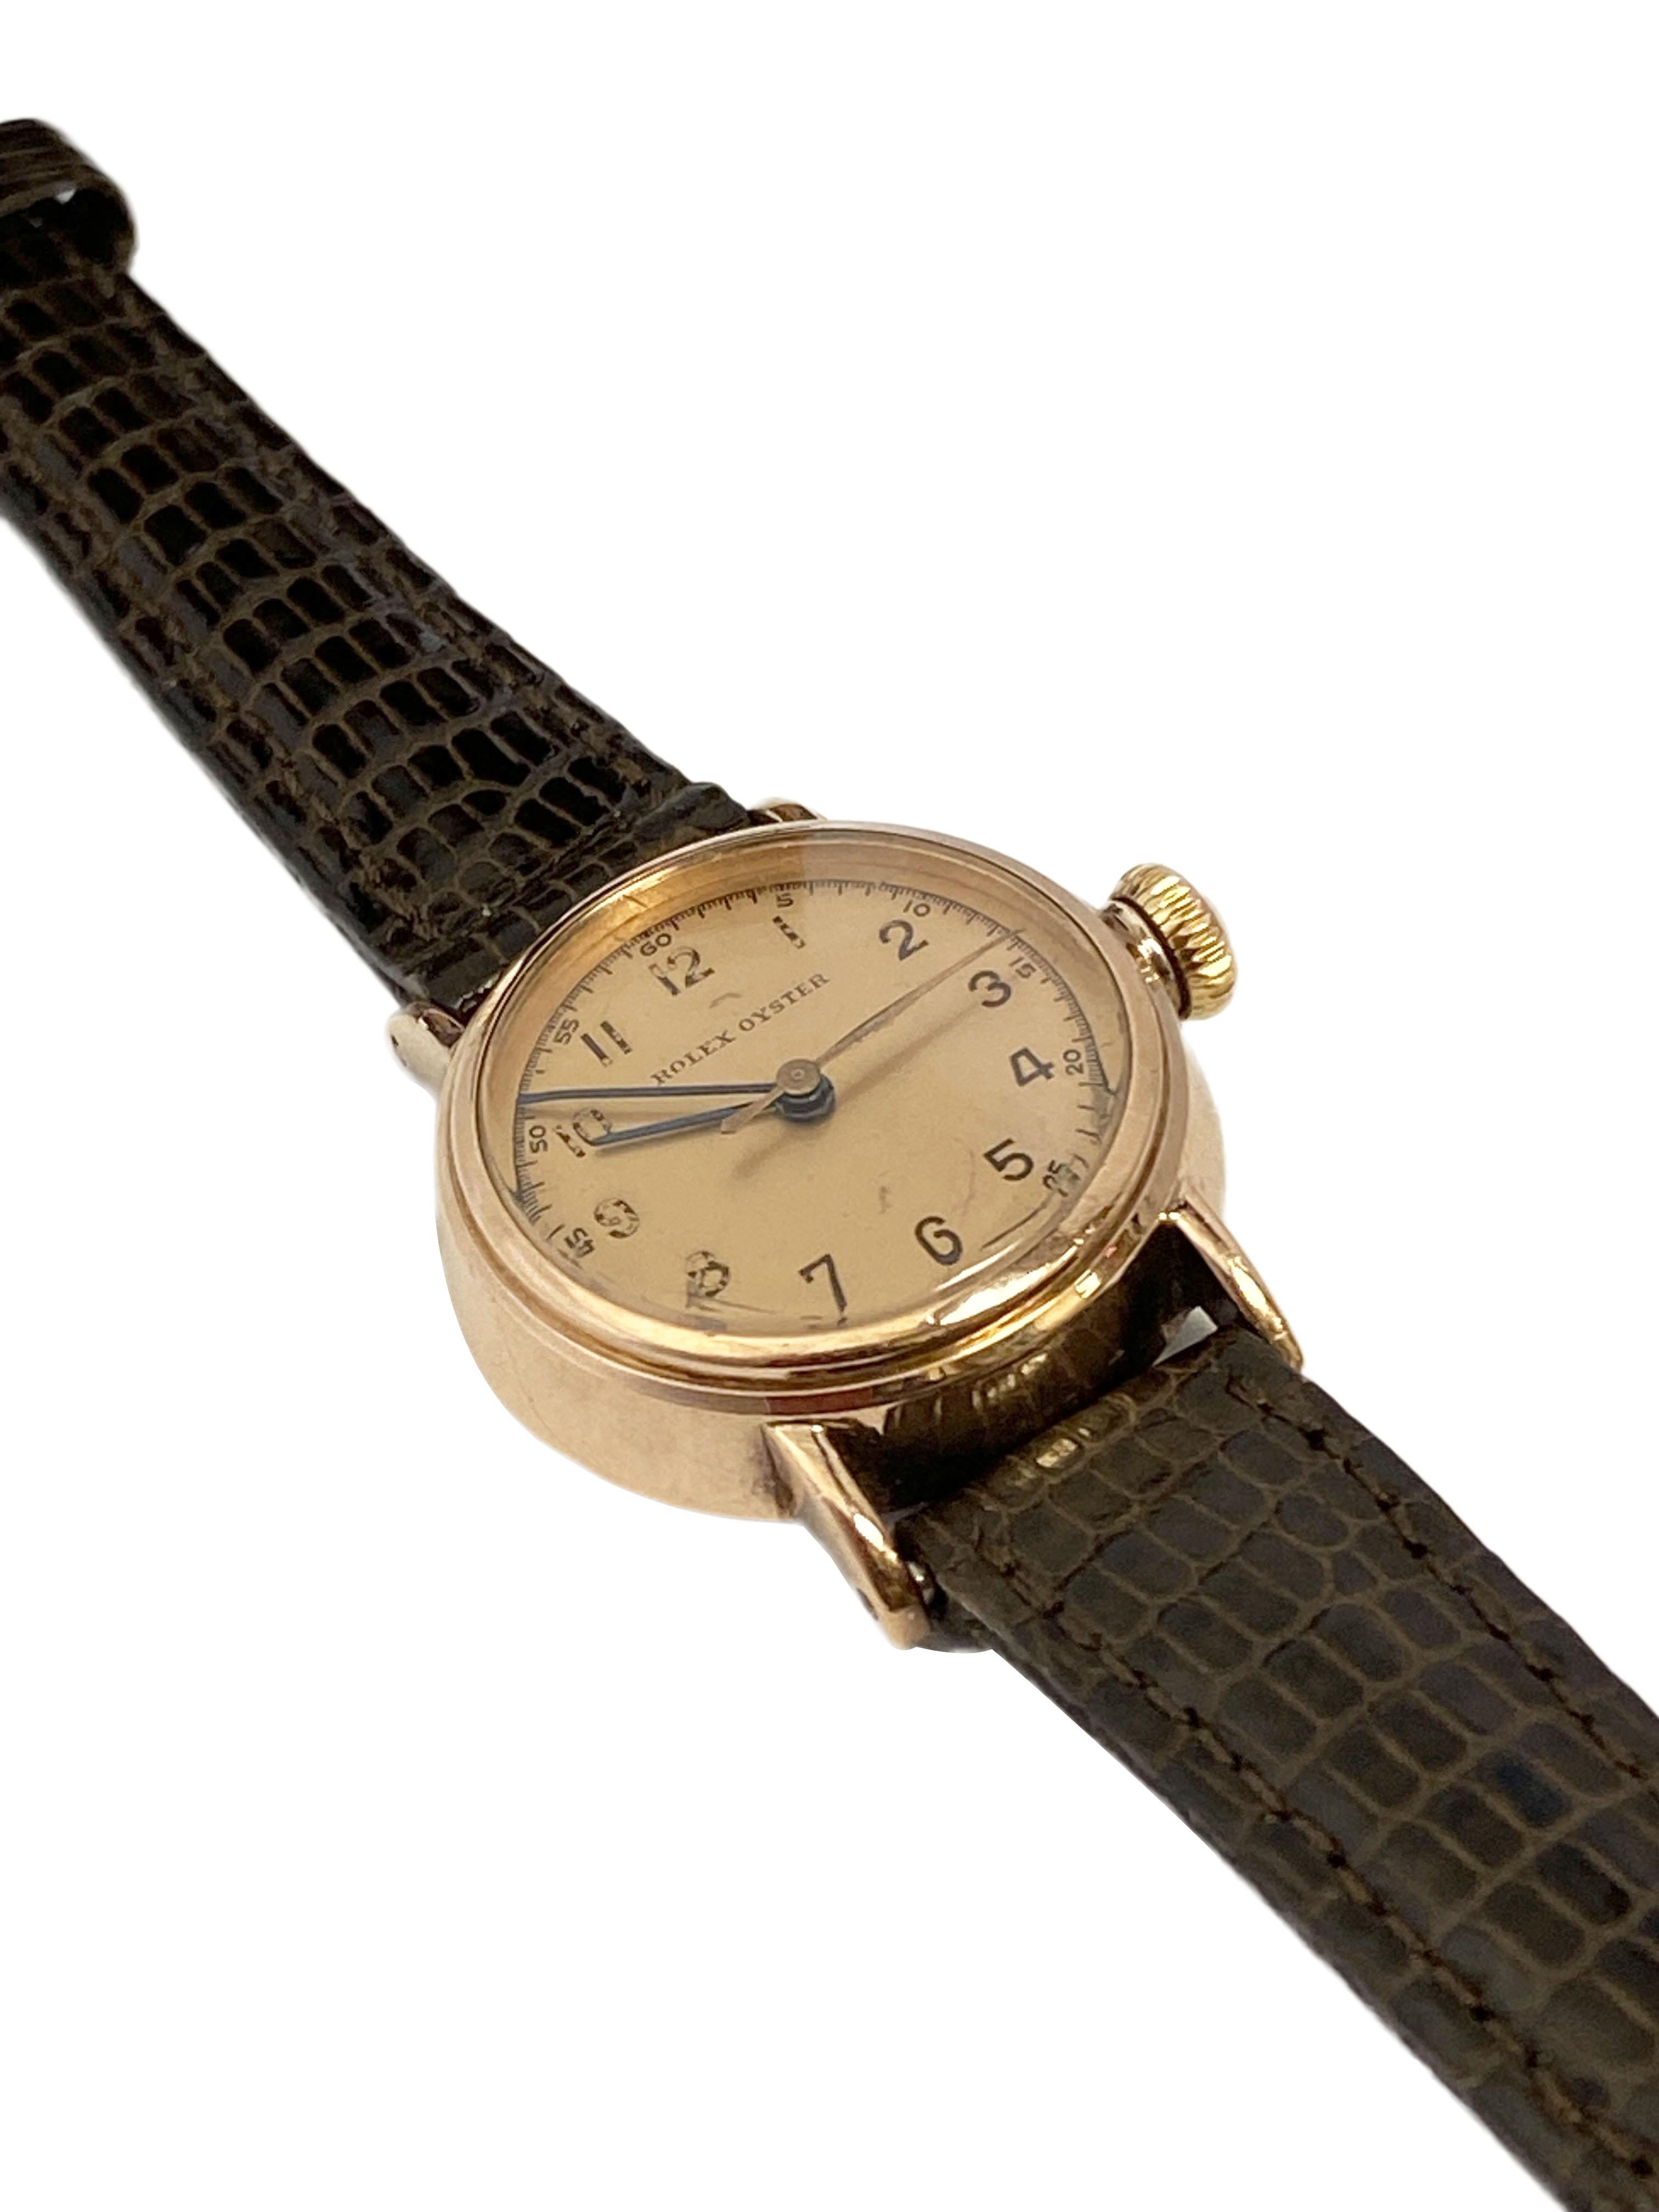 Circa 1930s Rolex Oyster Wrist Watch, 24 M.M. Rose Gold top with Steel back oyster Case and curved down Lugs. mechanical, manual wind movement, original screw down Oyster logo Crown, Original mint condition Rose color dial, Sweep seconds hand. New